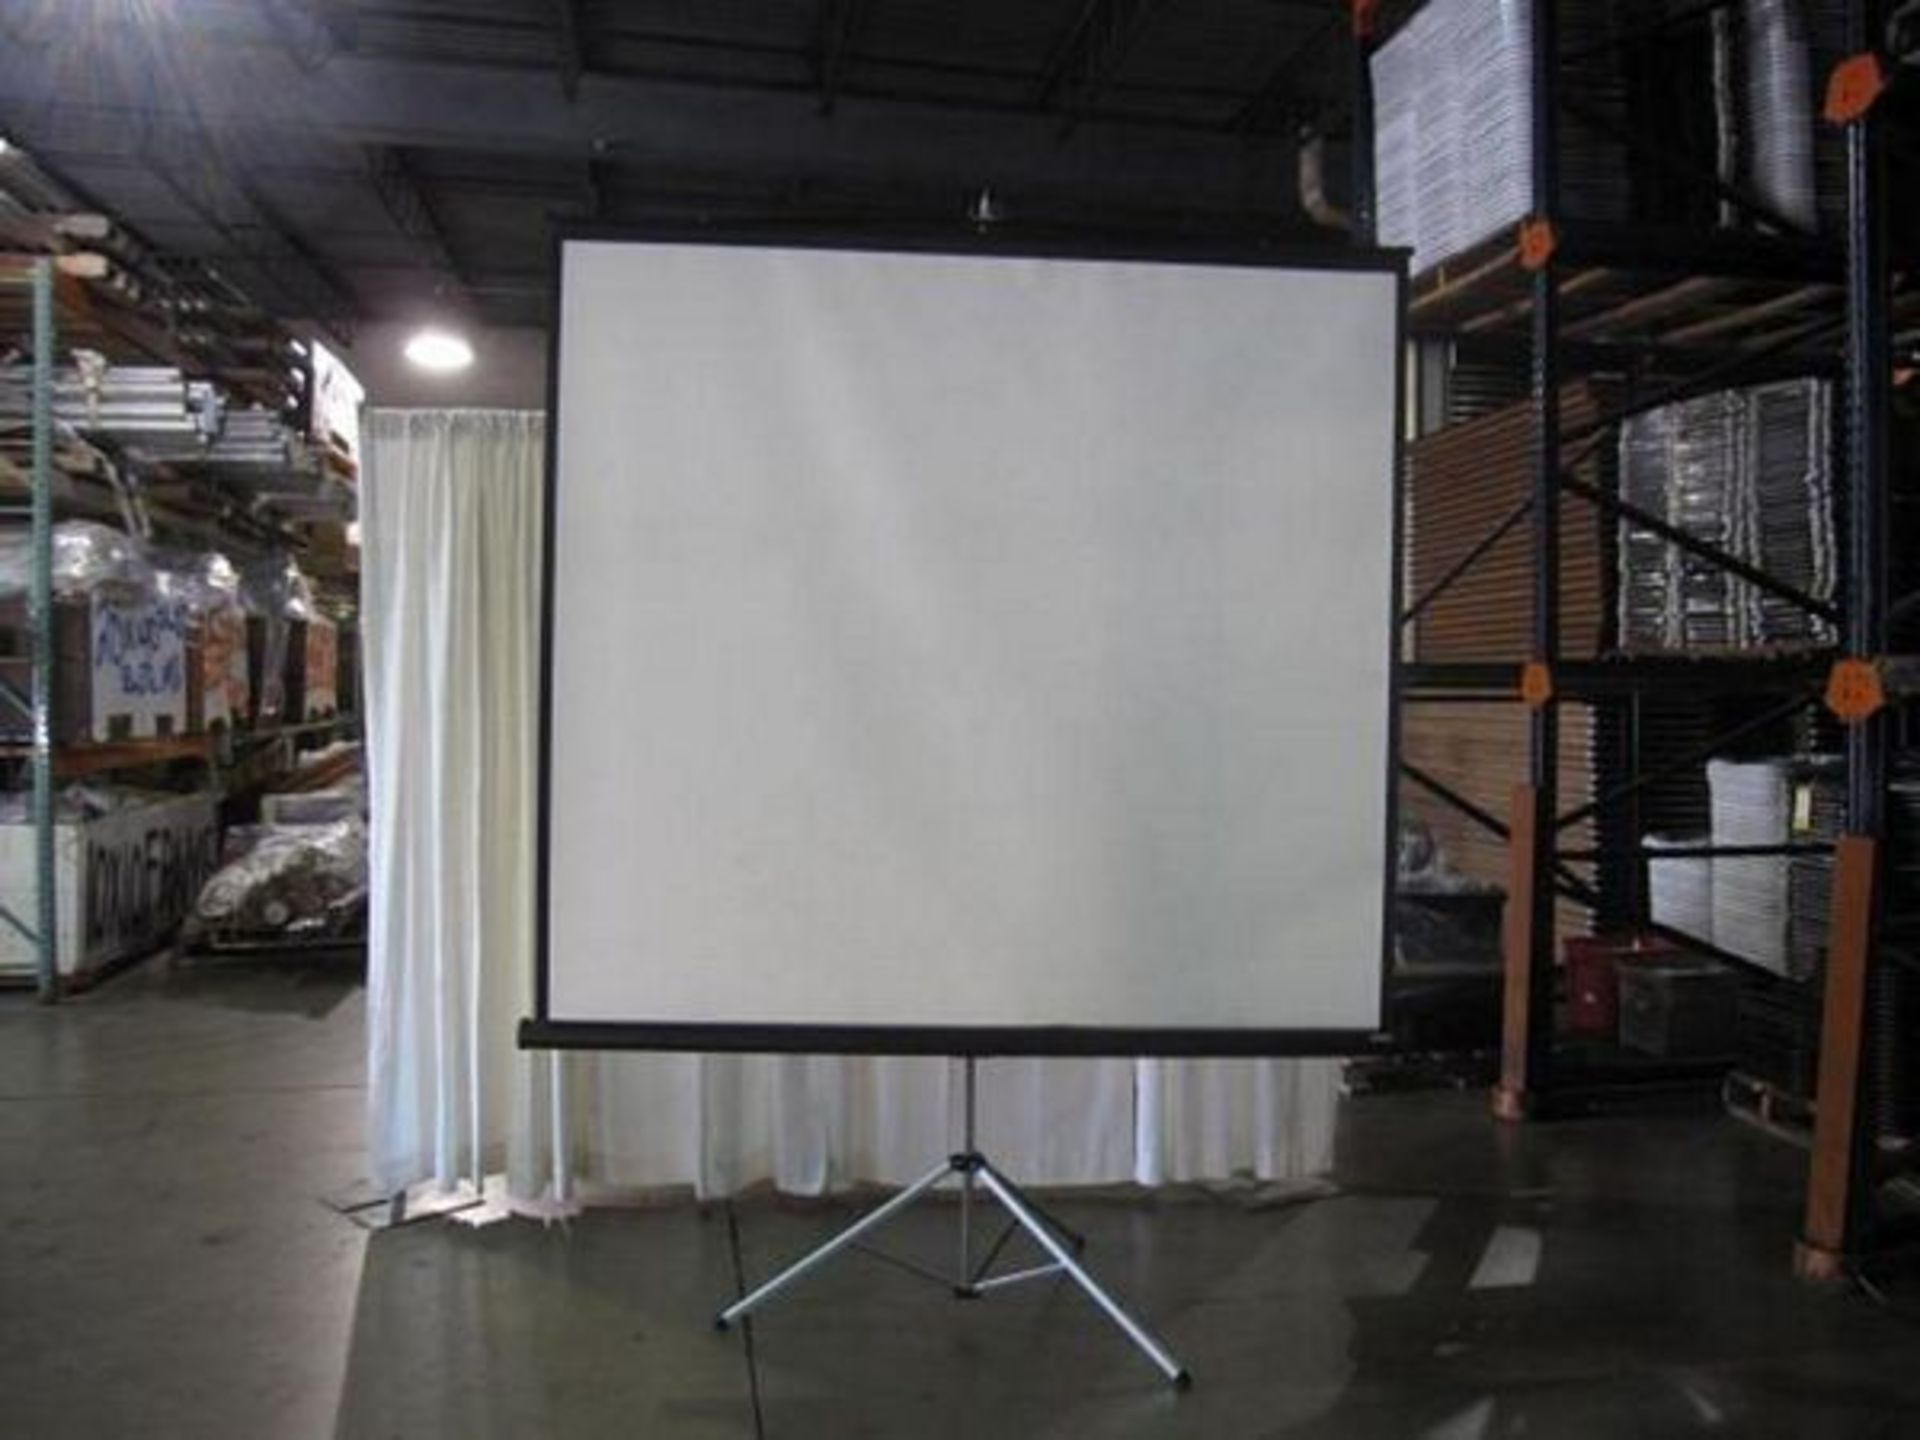 84 in. x 84 in. Projector Screen - Image 2 of 2